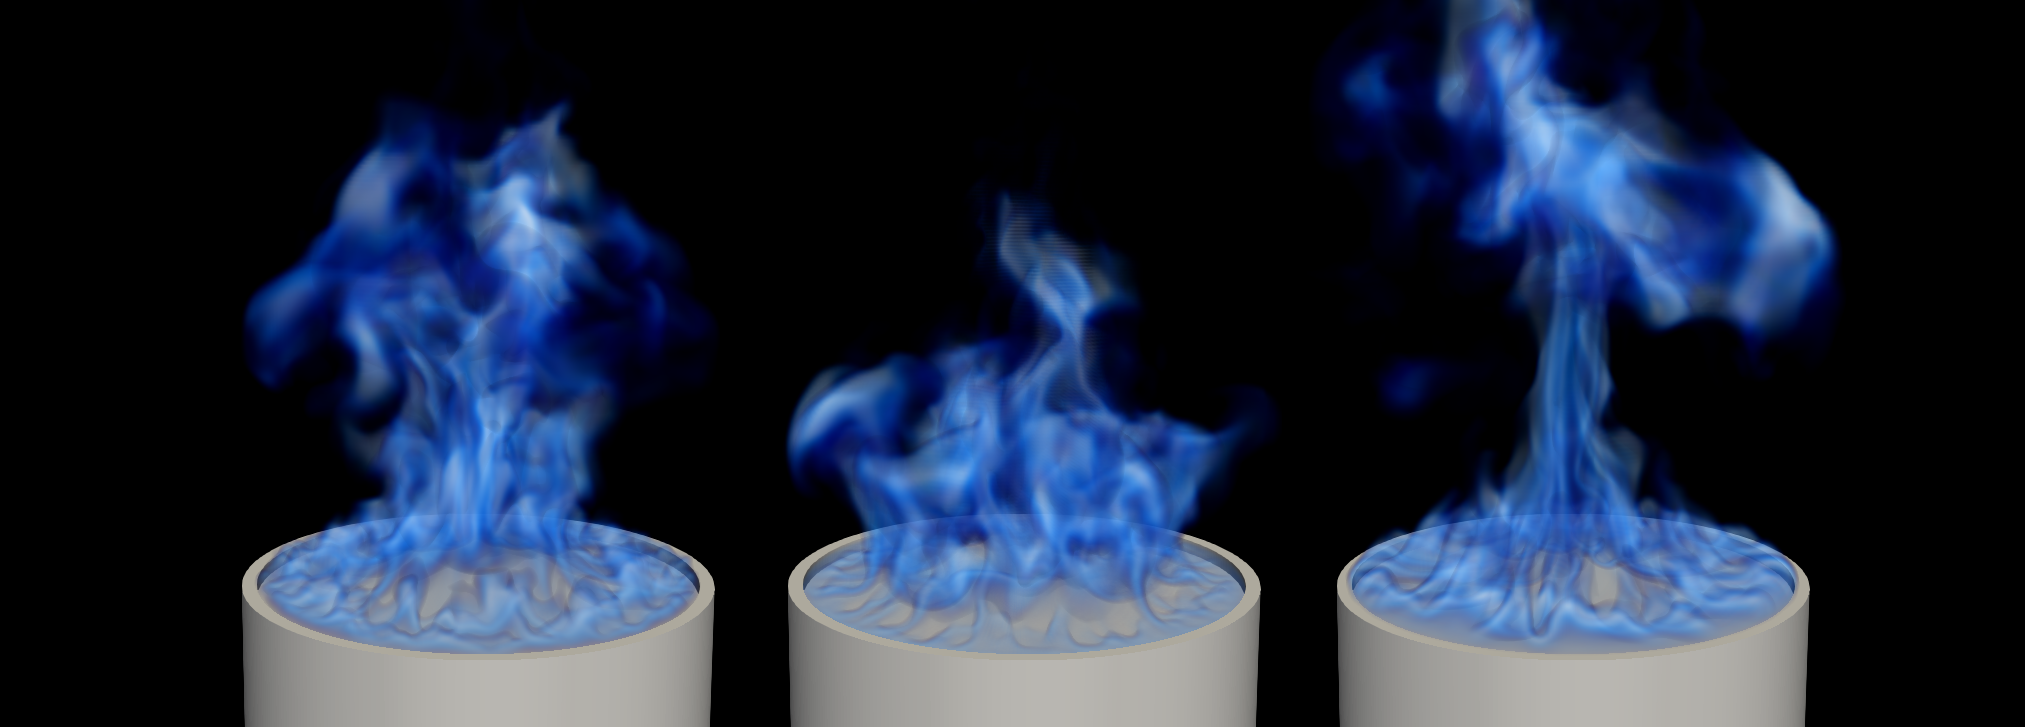 Instantaneous snapshots taken from a Large Eddy Simulation of a 30-cm diameter methanol pool fire. The flame is visualized using volume rendering of the high temperature region (defined as the region where temperatures are larger than 800 K). Credit: M. Ahmed &amp; A. Trouvé. 